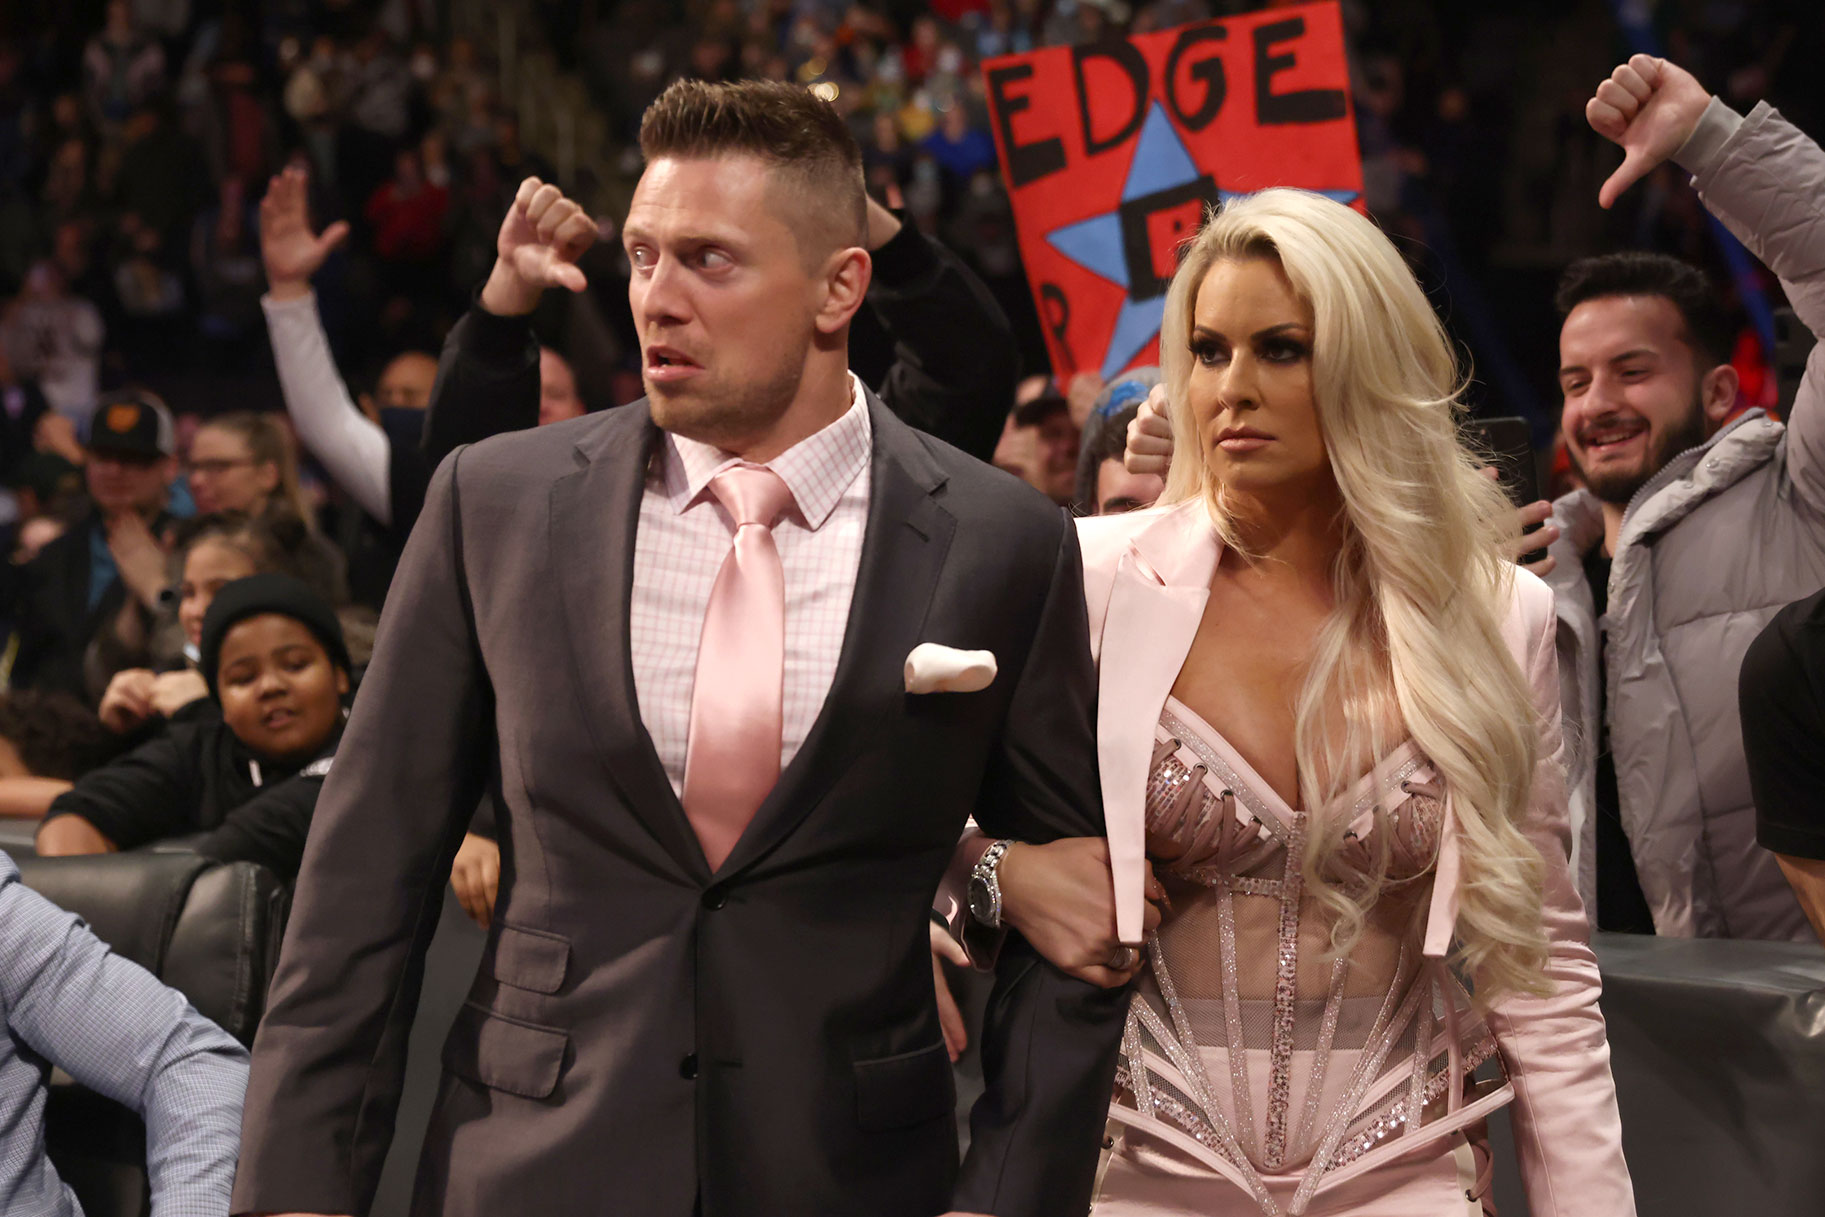 The Miz and Maryse outside of the ring being boo'd by the audience